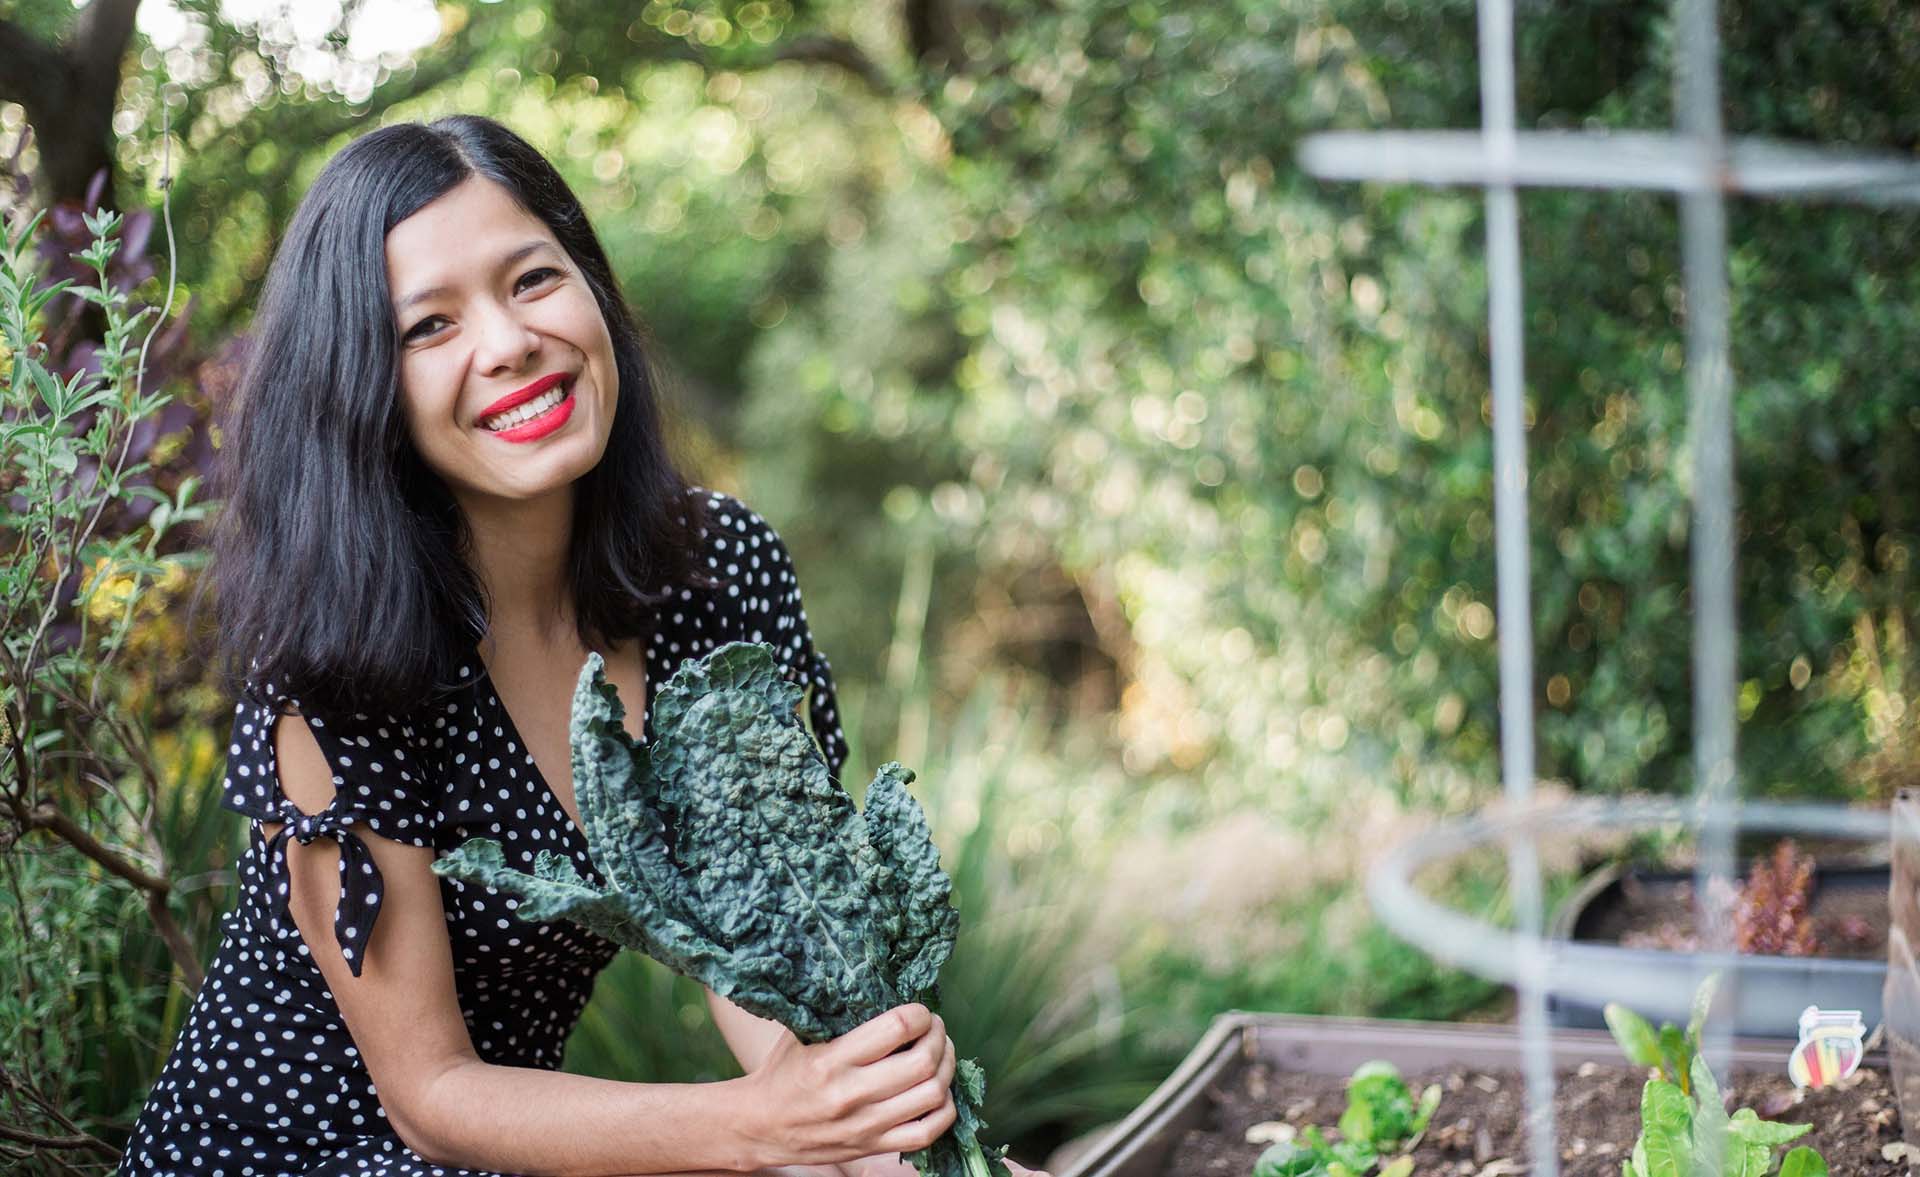 A woman seated outdoors next to a garden bed holds up a stalk of kale.